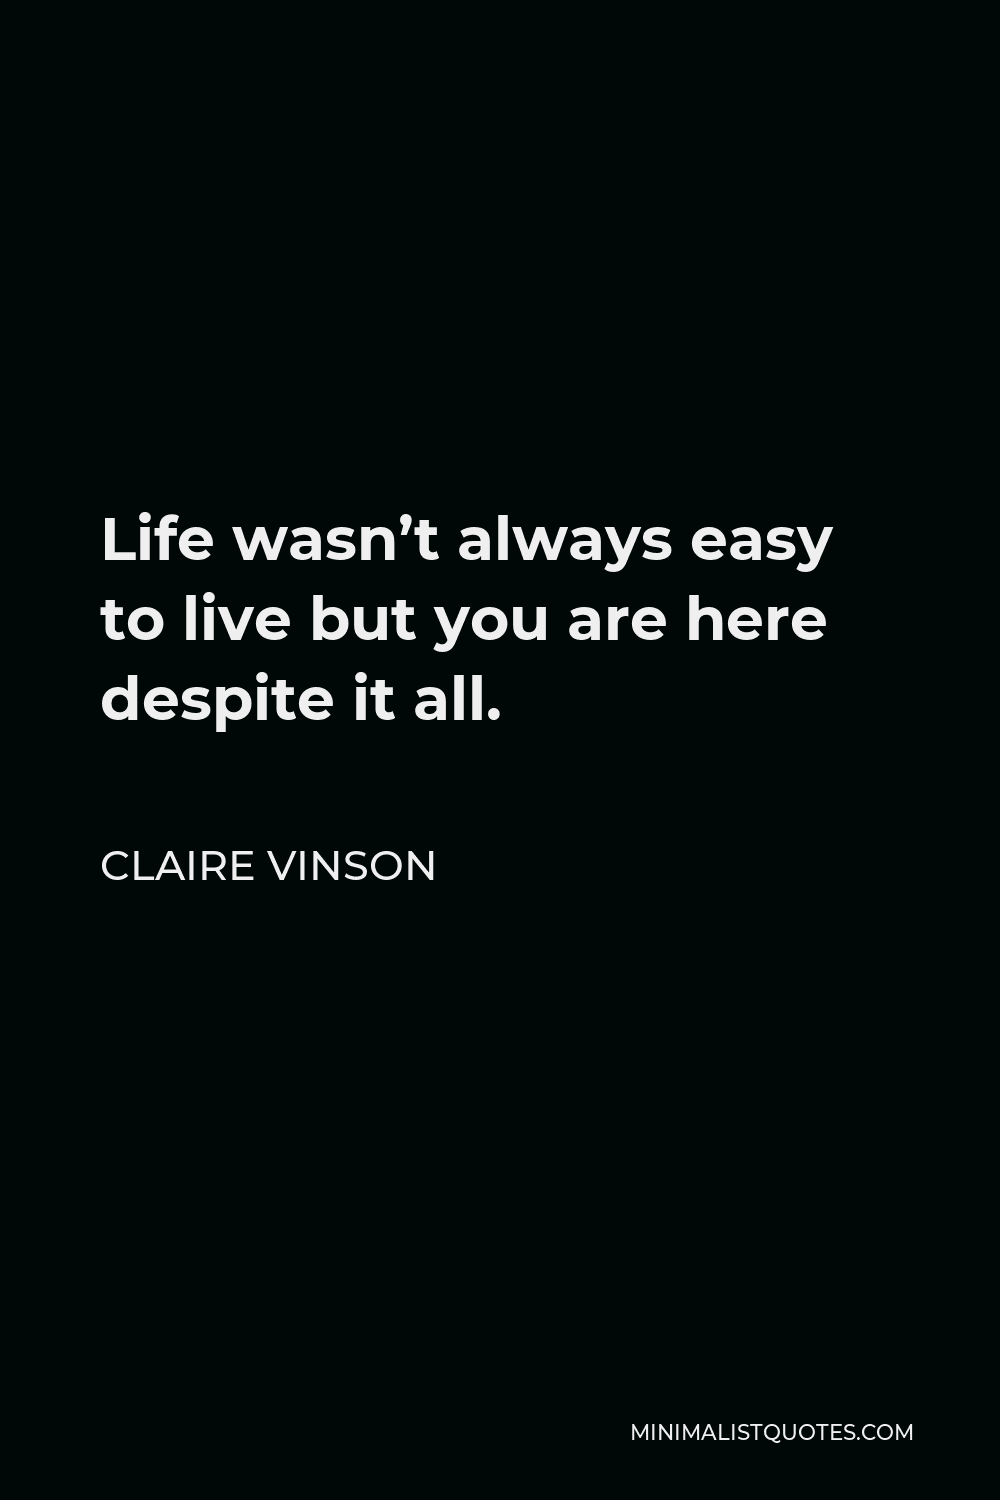 Claire Vinson Quote - Life wasn’t always easy to live but you are here despite it all.